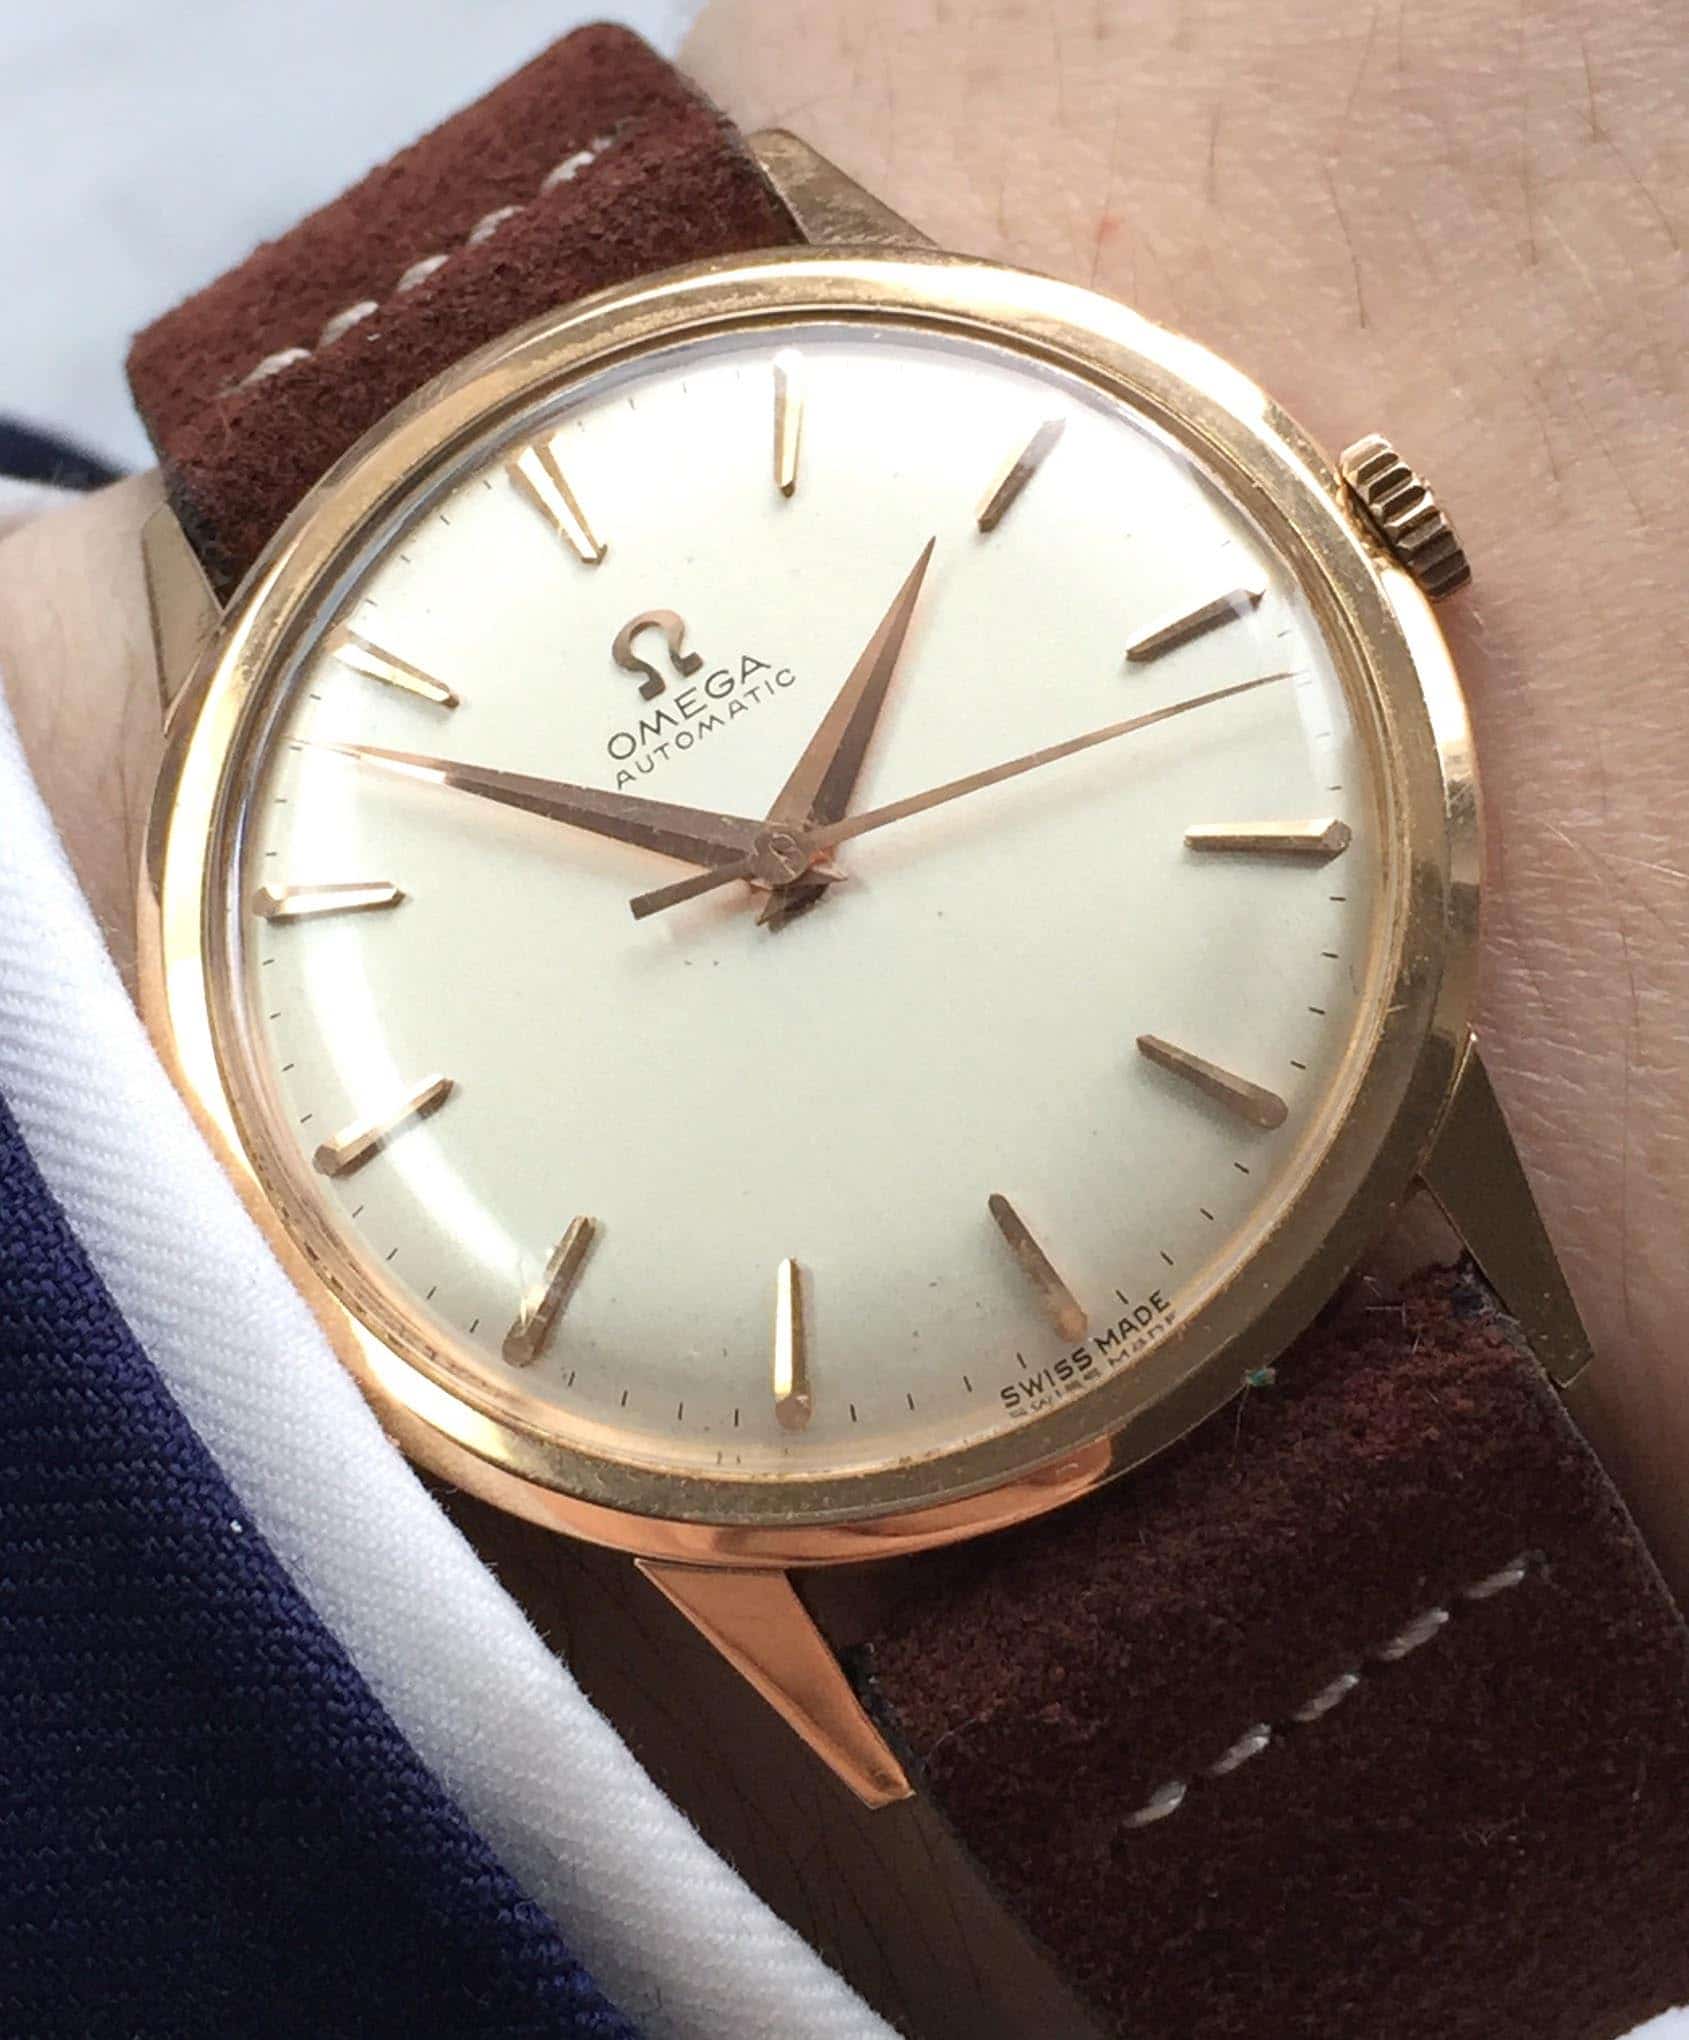 omega rose gold watch